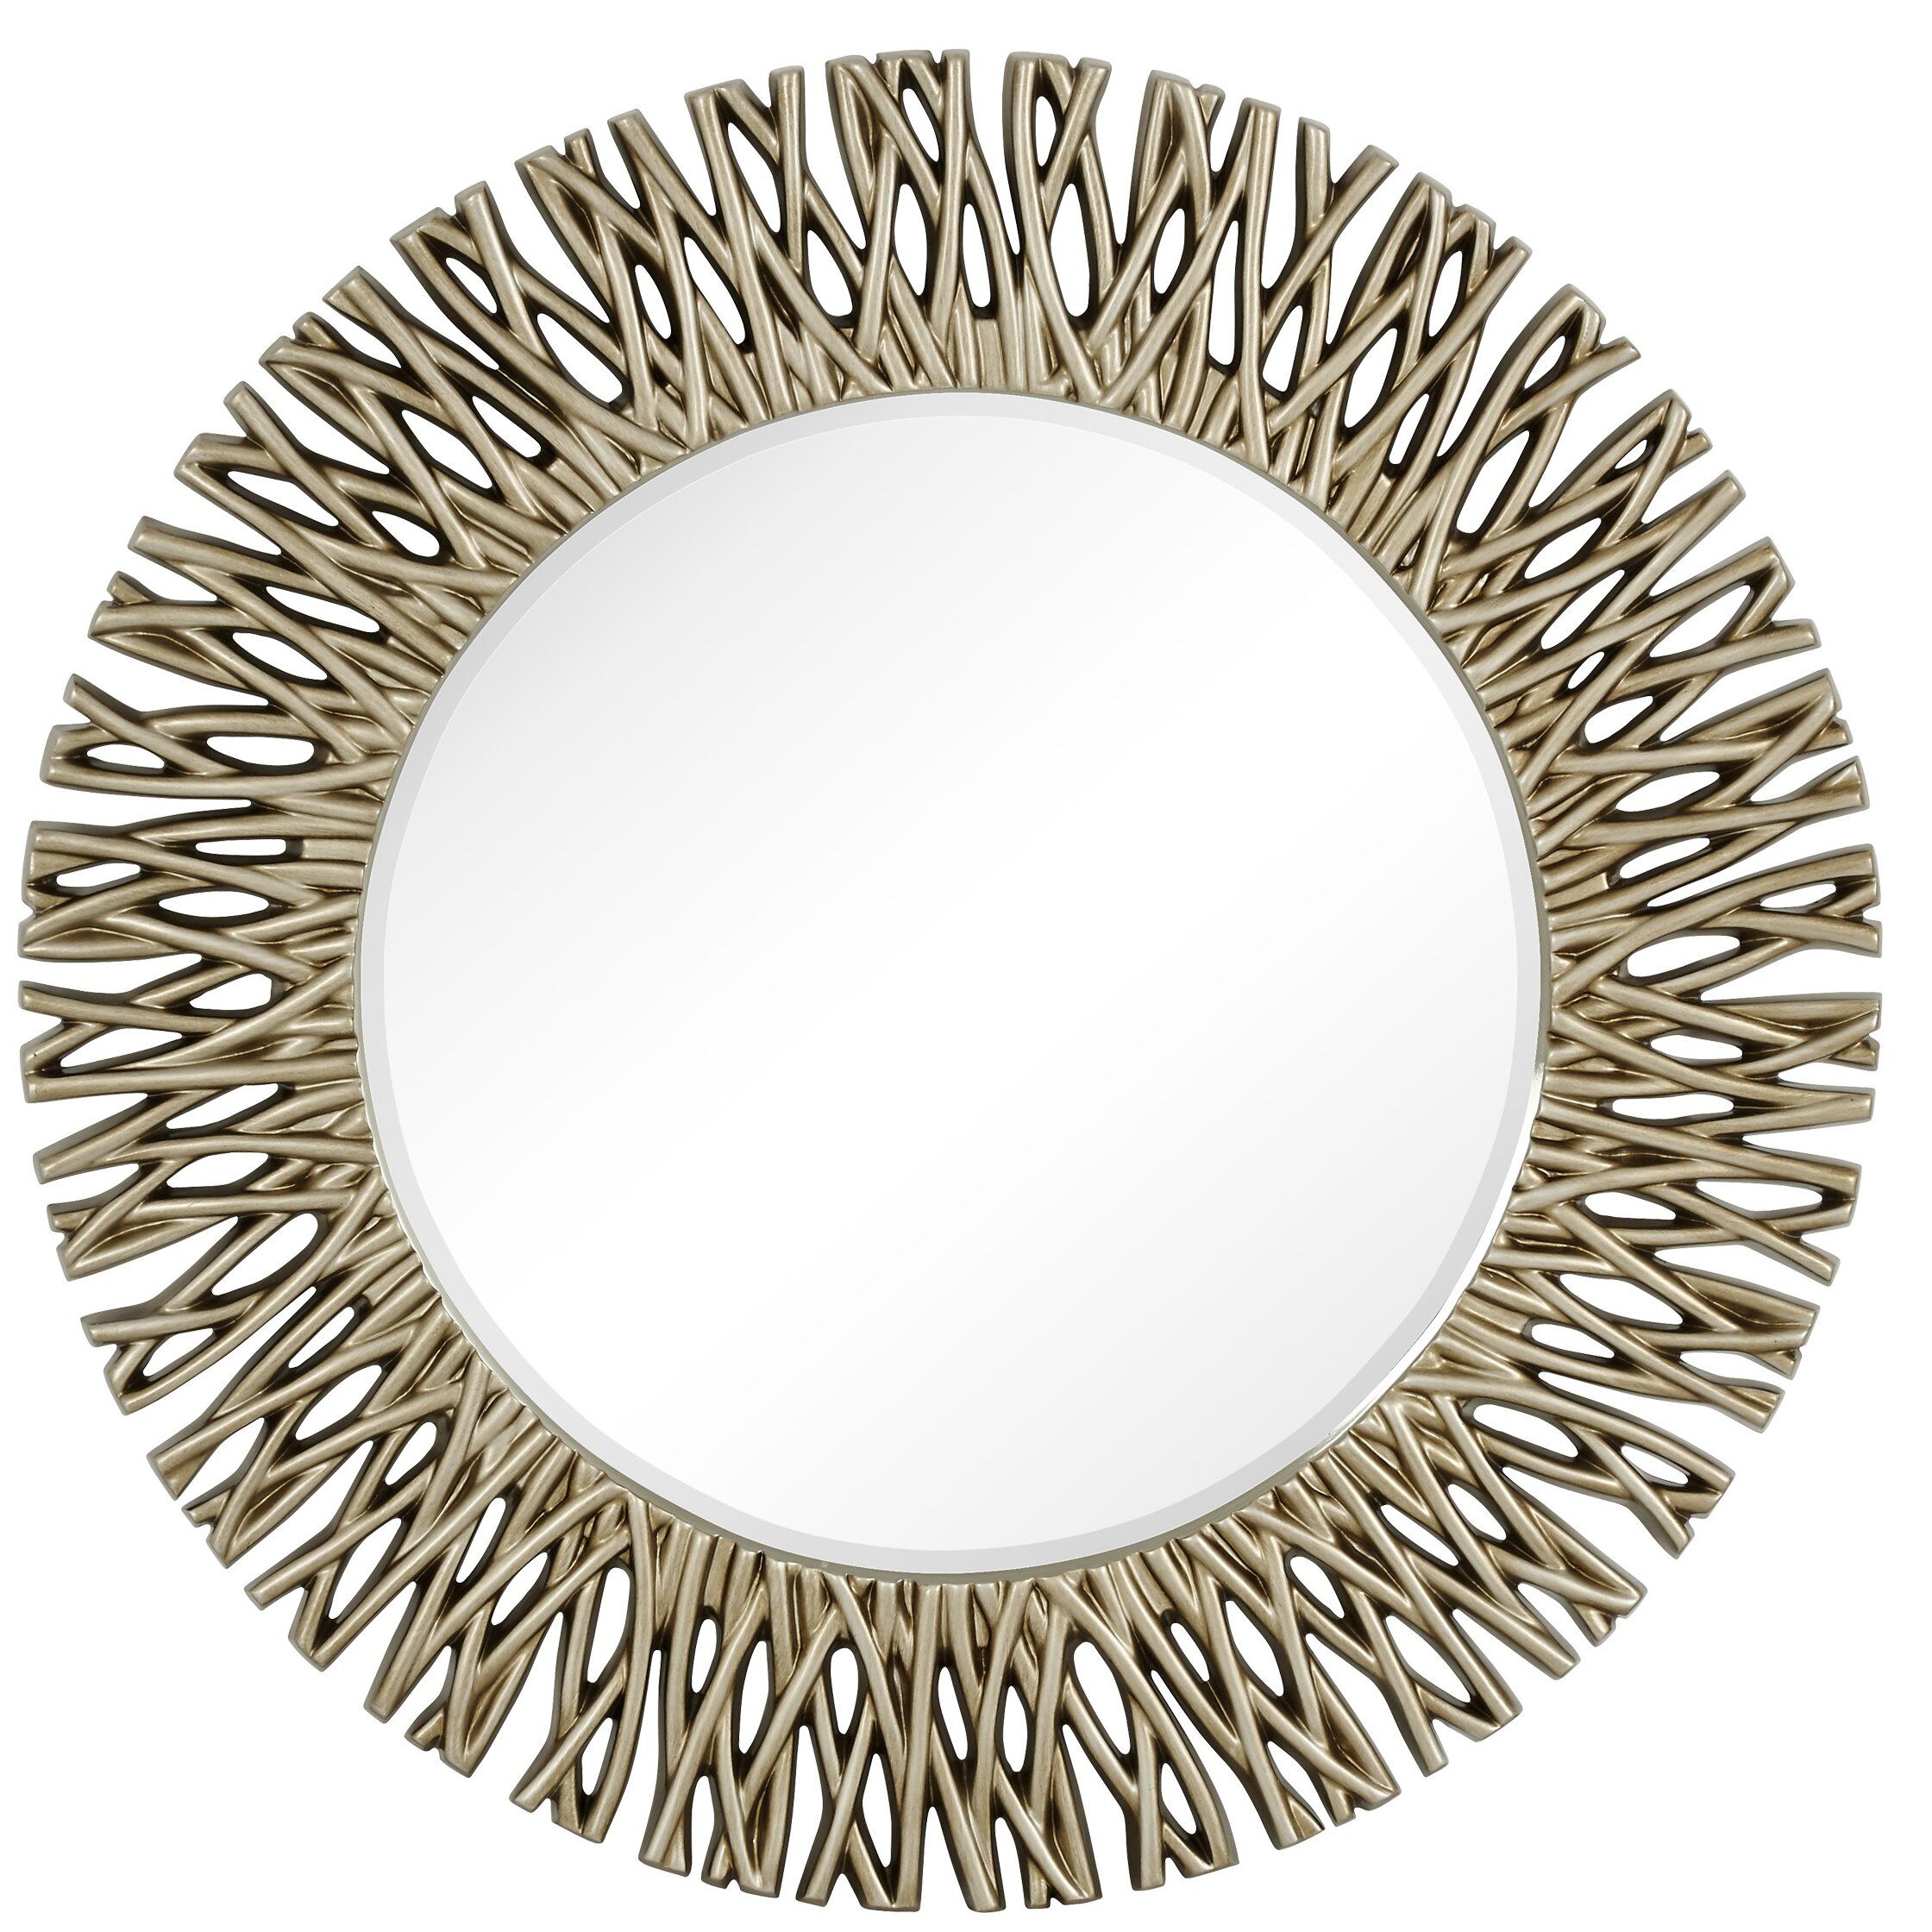 Majestic Mirror Large Round Antique Silver Decorative Beveled Glass Throughout Antique Gold Leaf Round Oversized Wall Mirrors (View 3 of 15)